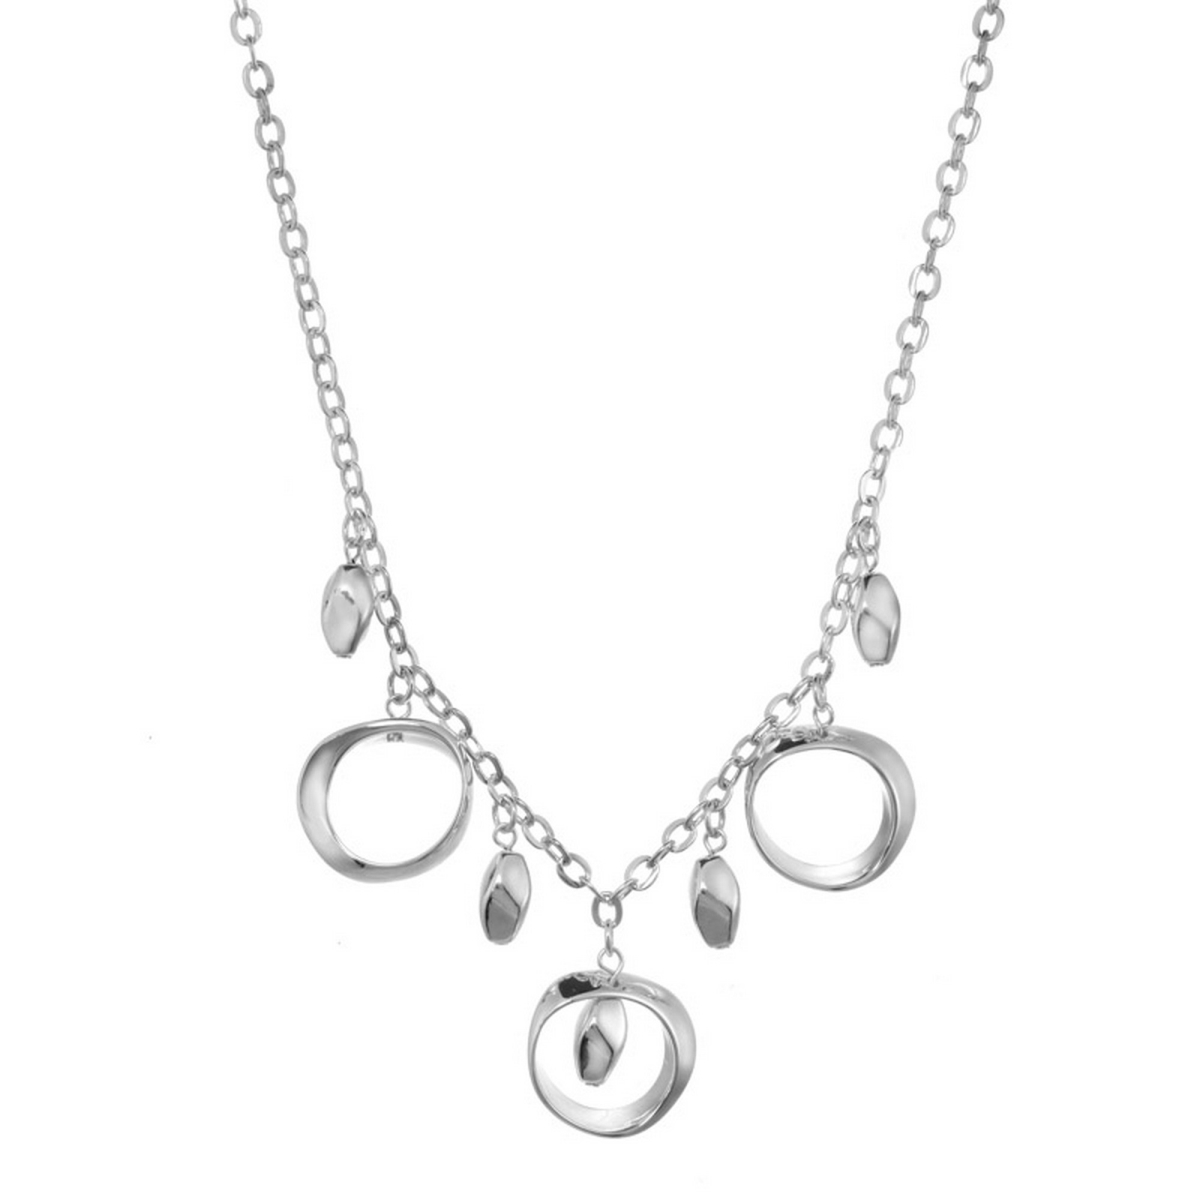 Picture of J&H Designs JHN9003-Silver Hoop & Bead Statement Necklace